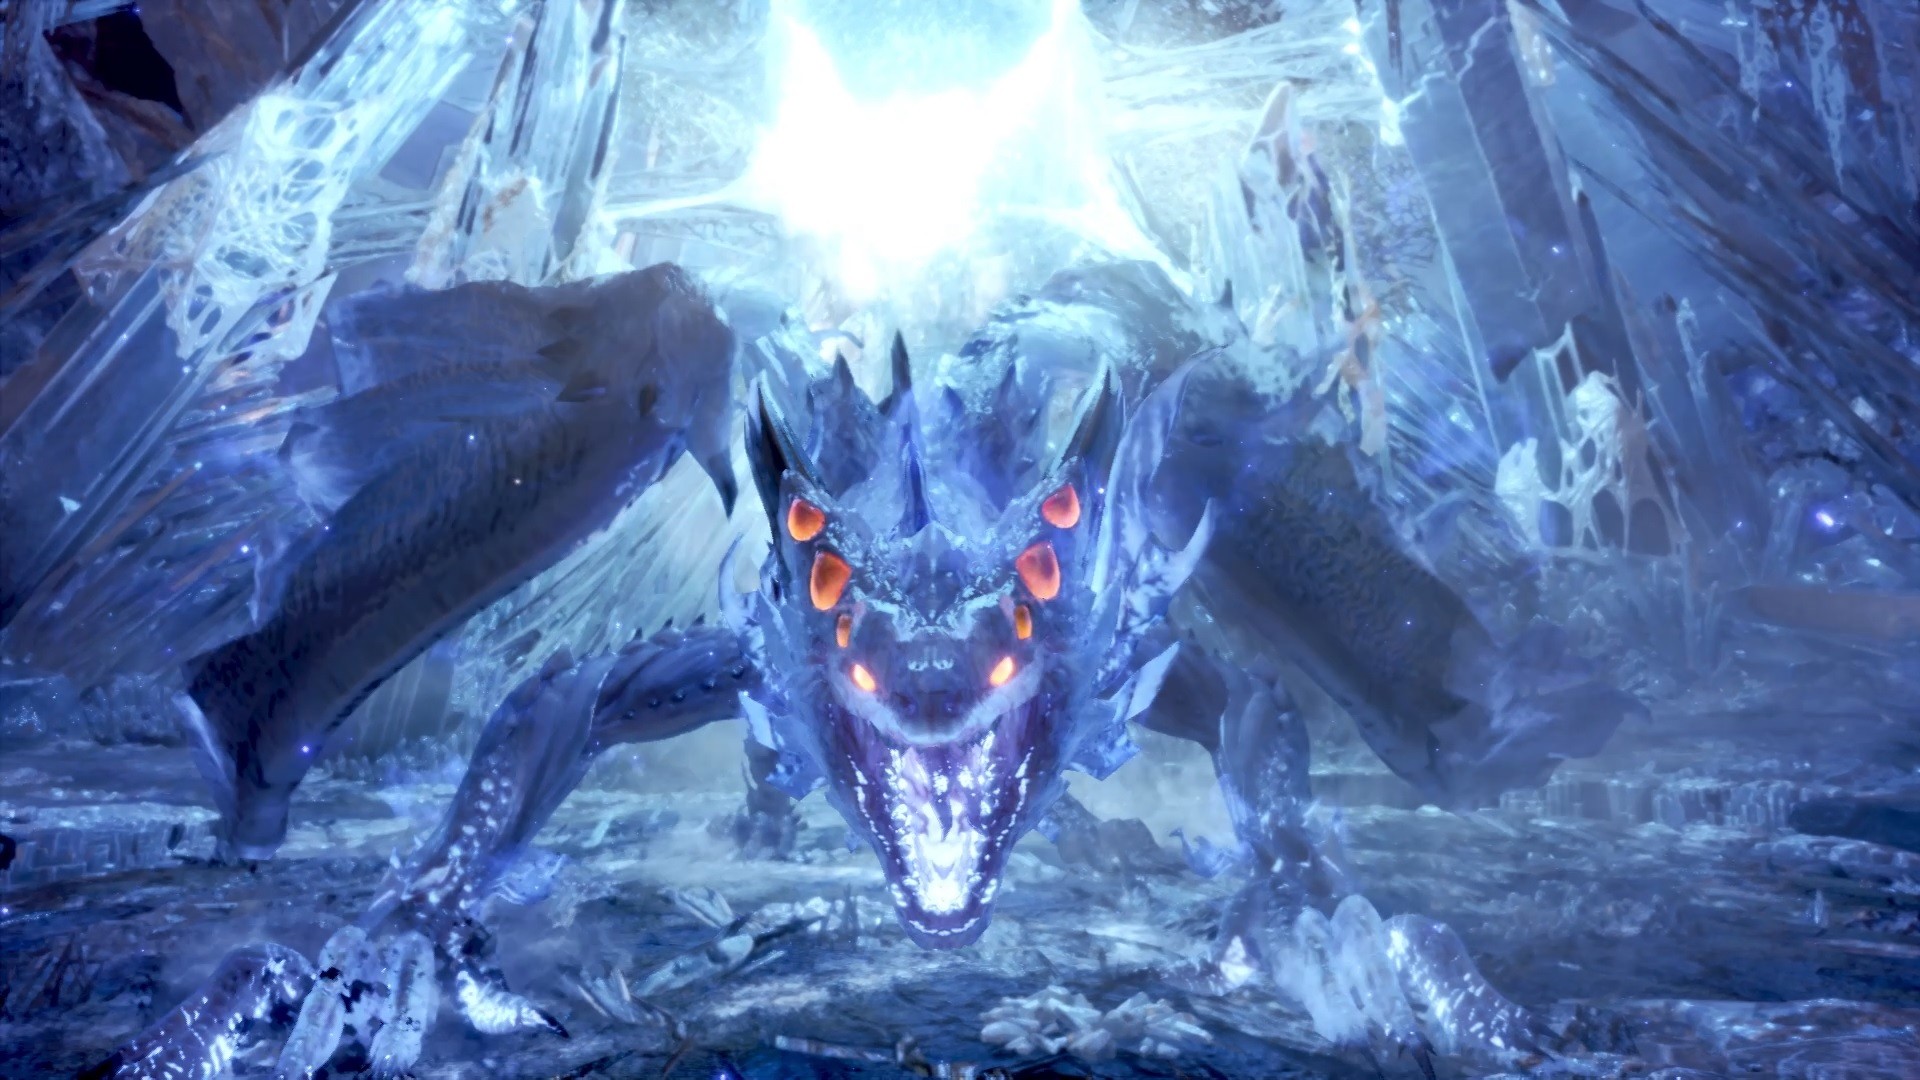 Best dragon games: Monster Hunter World. Image shows a large dragon in its cave.